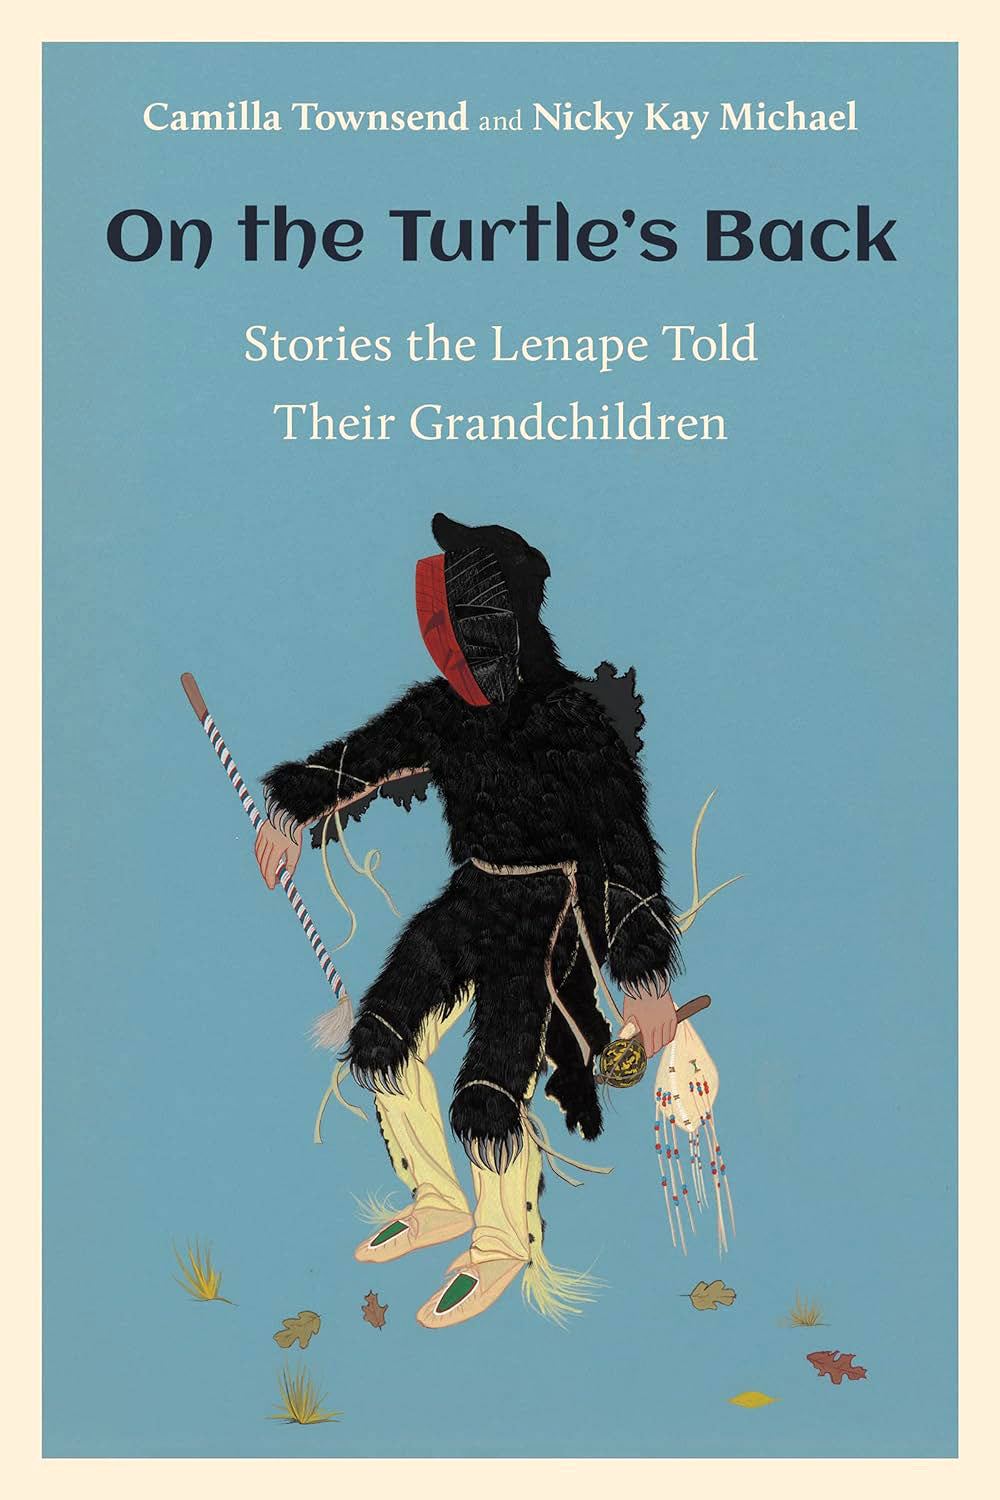 On the Turtle's Back: Stories the Lenape Told Their Grandchildren by Camilla Townsend and Nicky Kay Michael